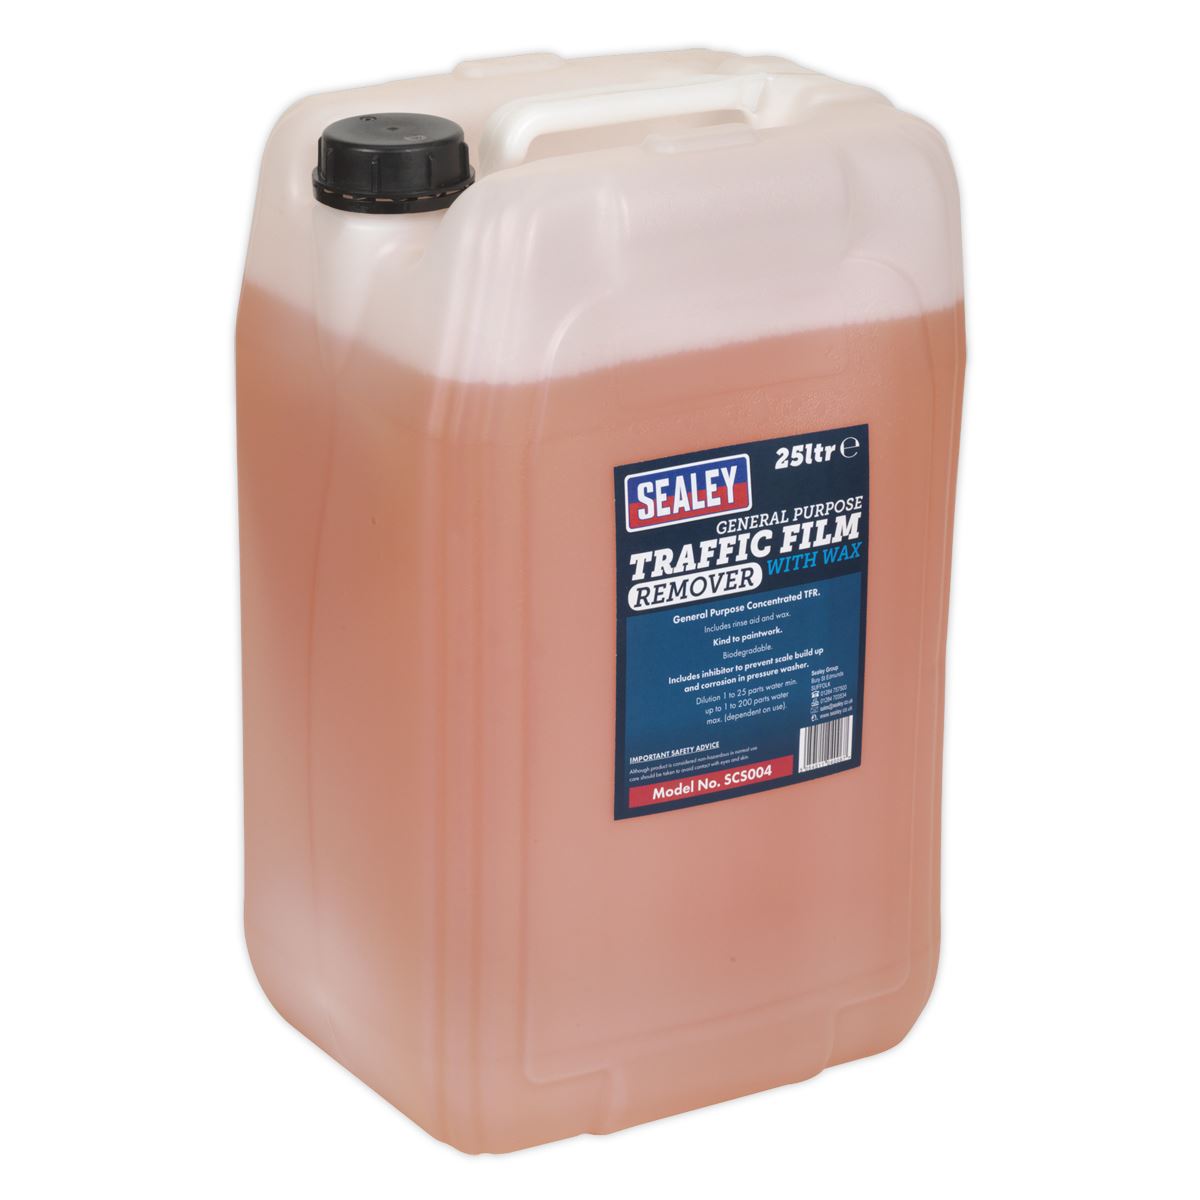 Sealey TFR Detergent with Wax Concentrated 25L